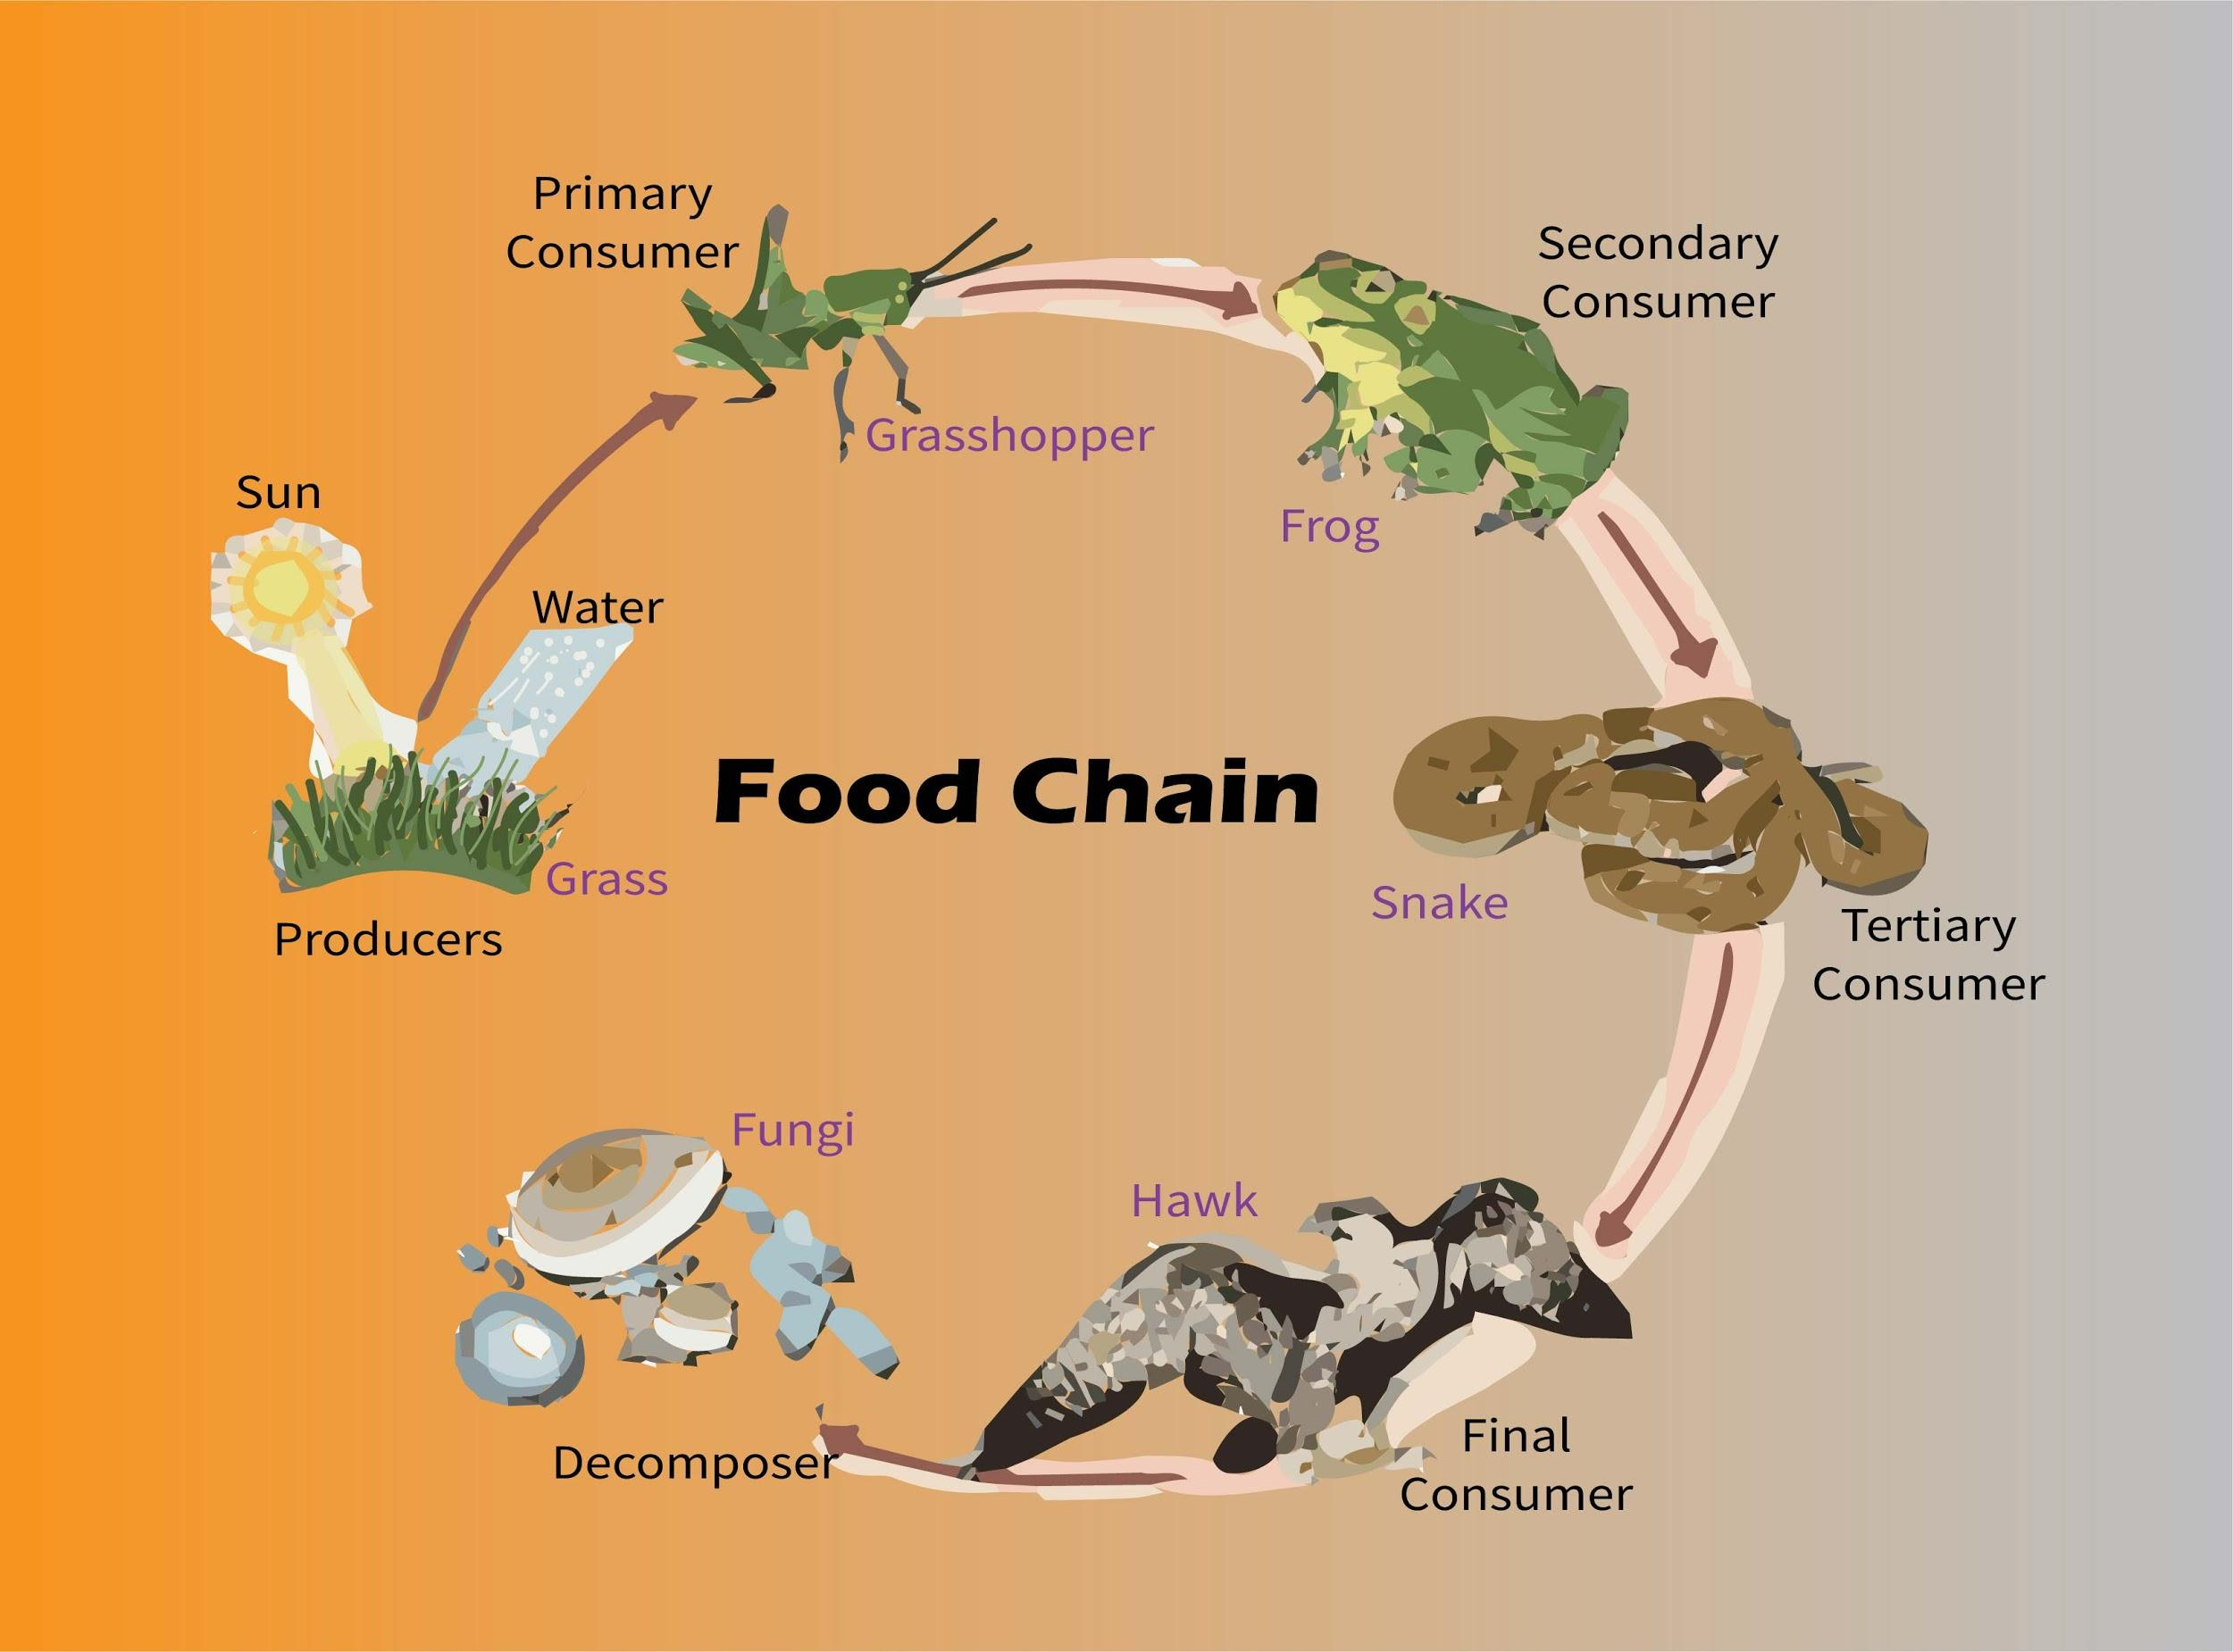 What is the correct food chain in grassland?(a) Grass Snake Insect Deer(b)  Grass Wolf Deer Buffalo(c) Bacteria Grass Rabbit Wolf(d) Grass Insect Frog  Snake